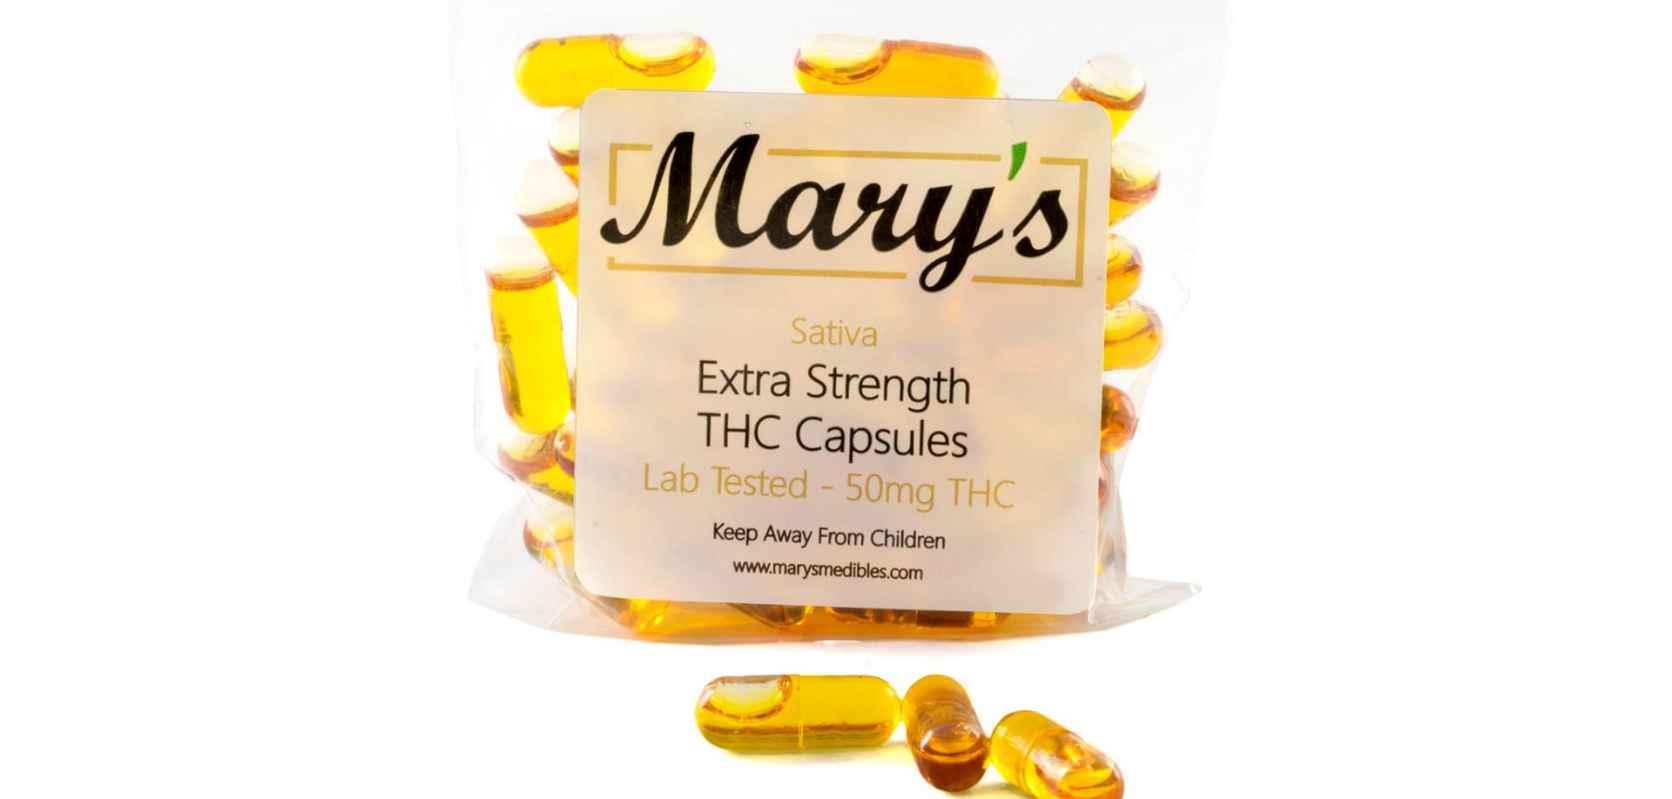 Mary's THC Capsules 50mg Sativa is a tasty, low-dose way to enjoy your favourite strains. 